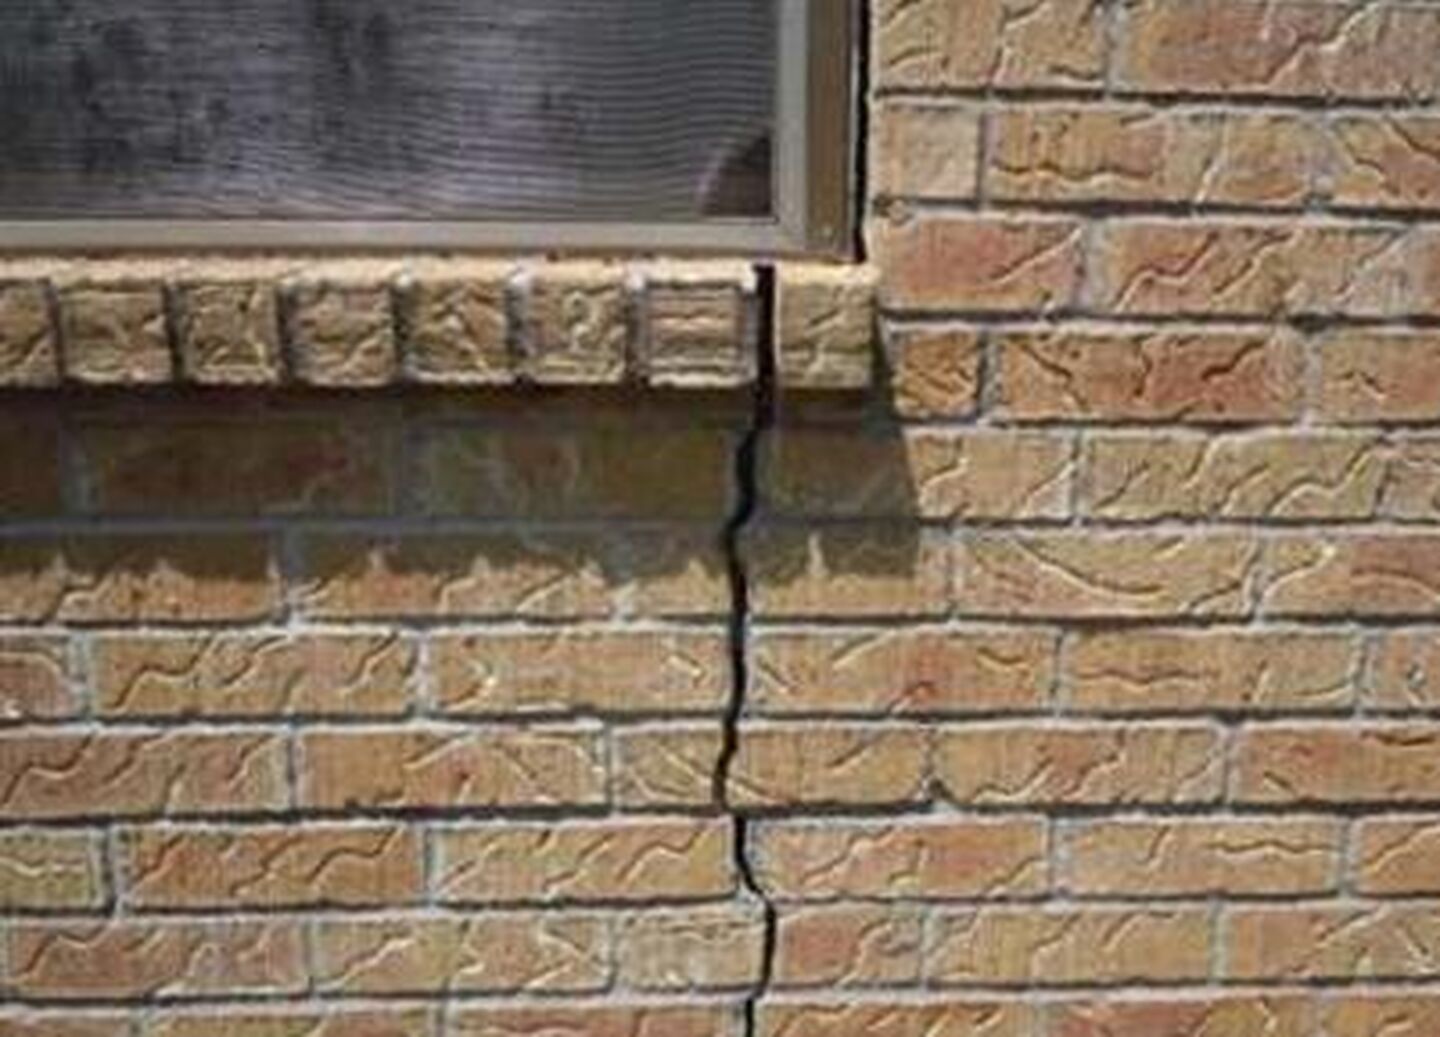 Three Myths About Structural Foundation Damage in Chicago Homes